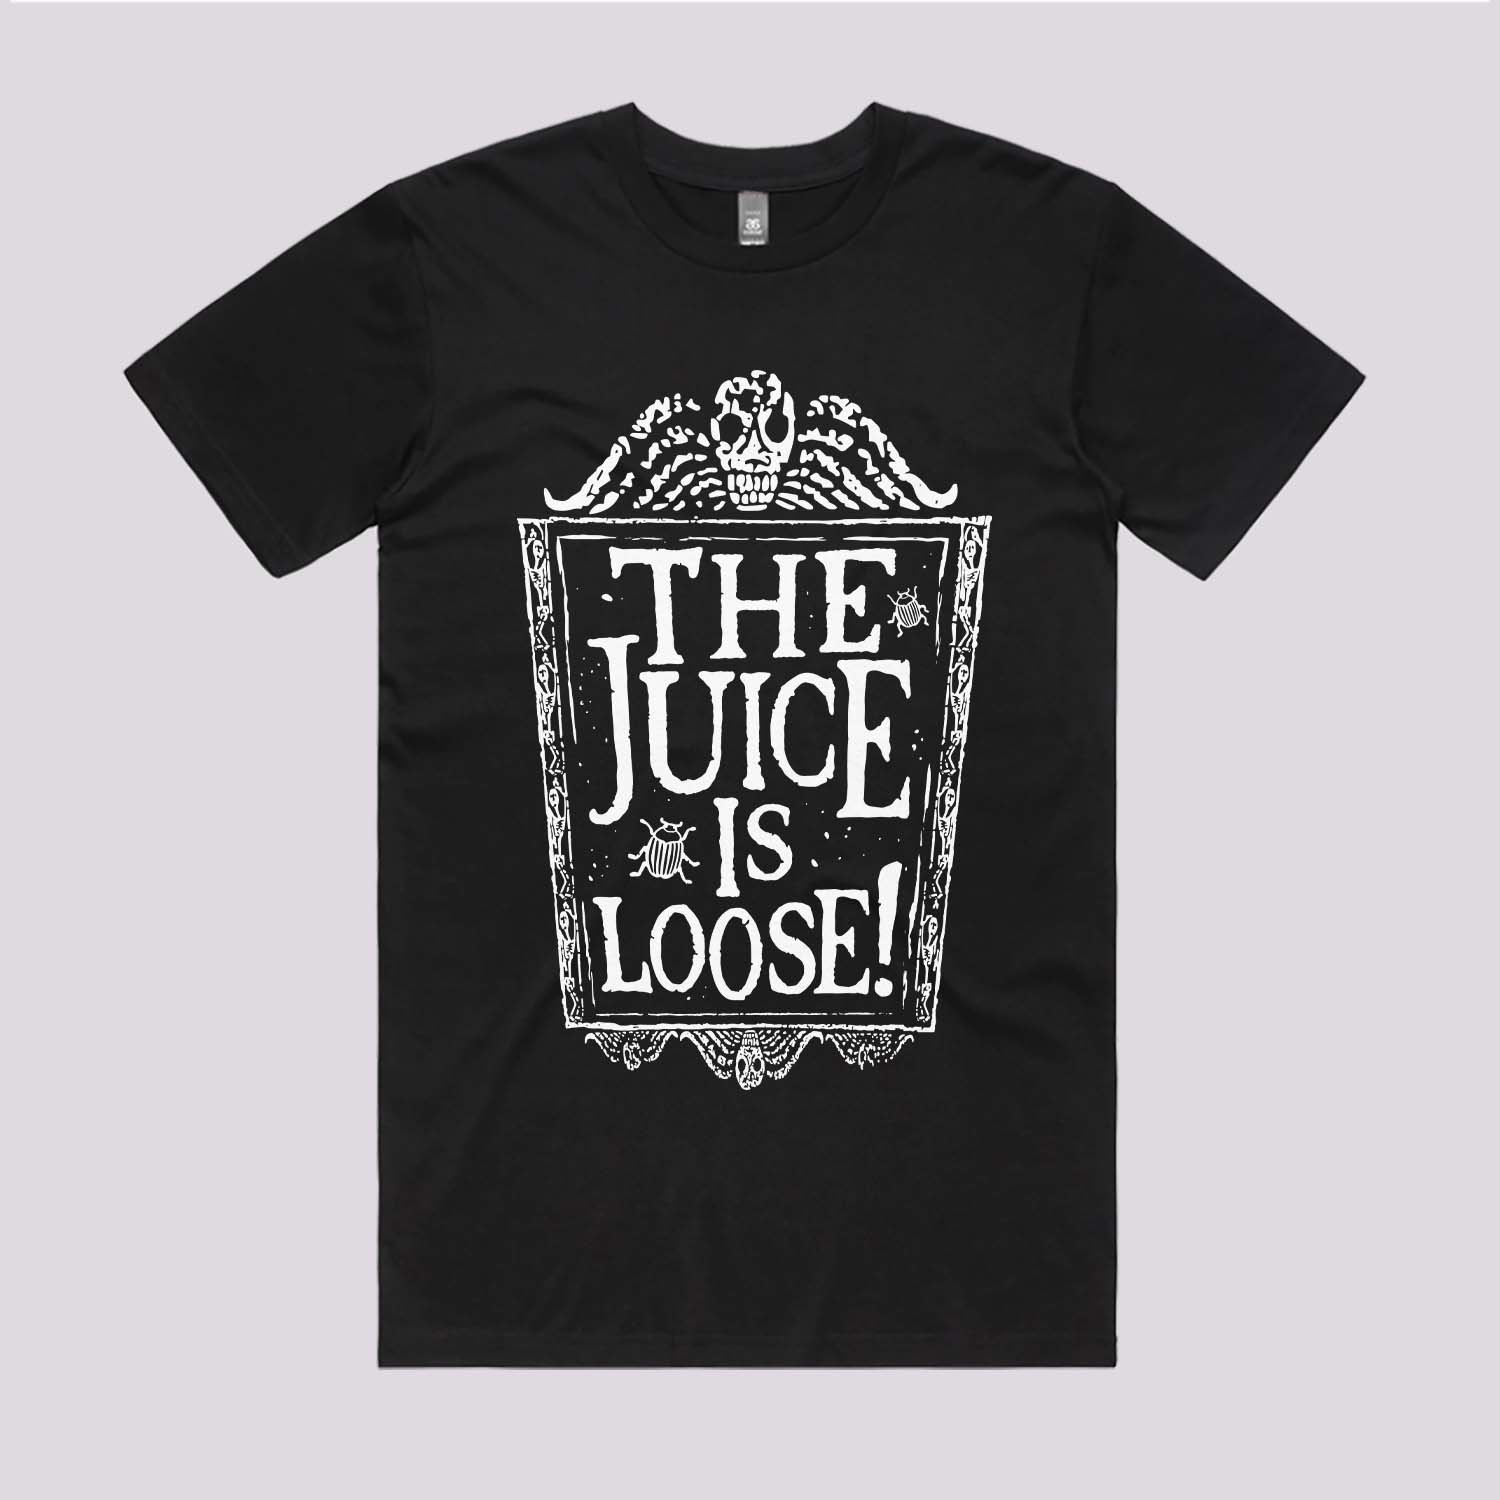 The Juice is Loose T-Shirt